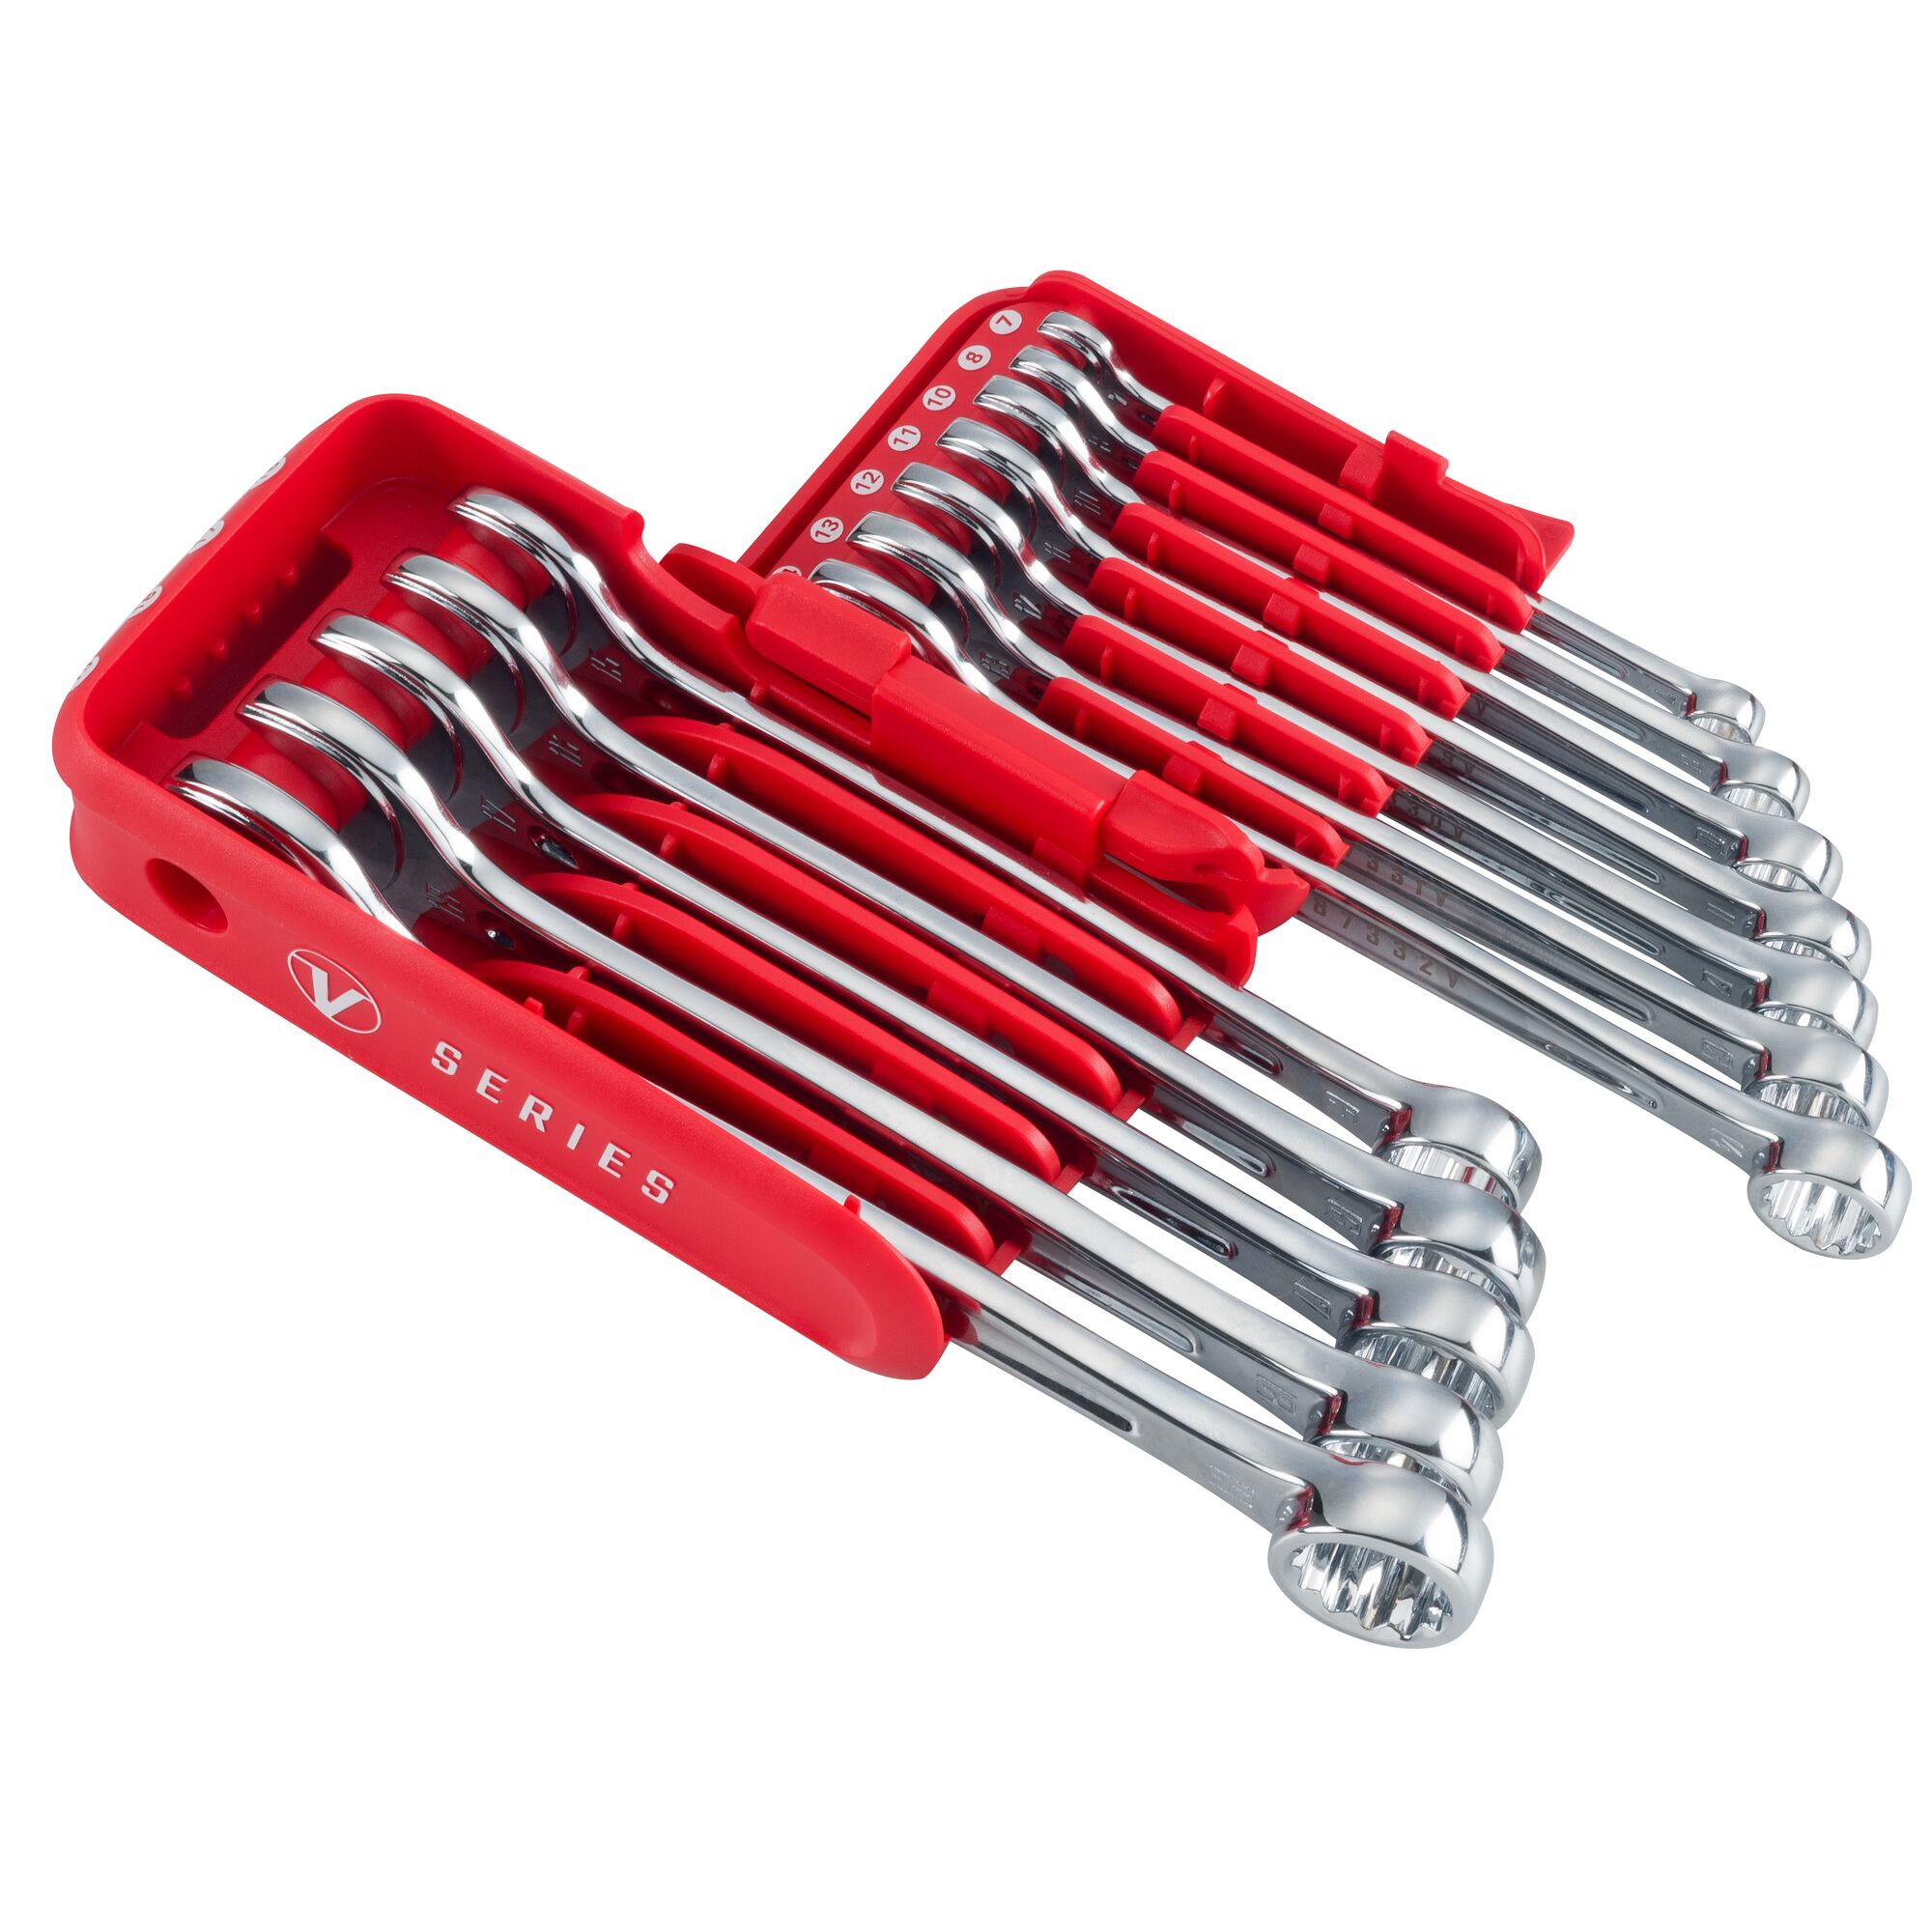 View of CRAFTSMAN Wrenches: Combination highlighting product features